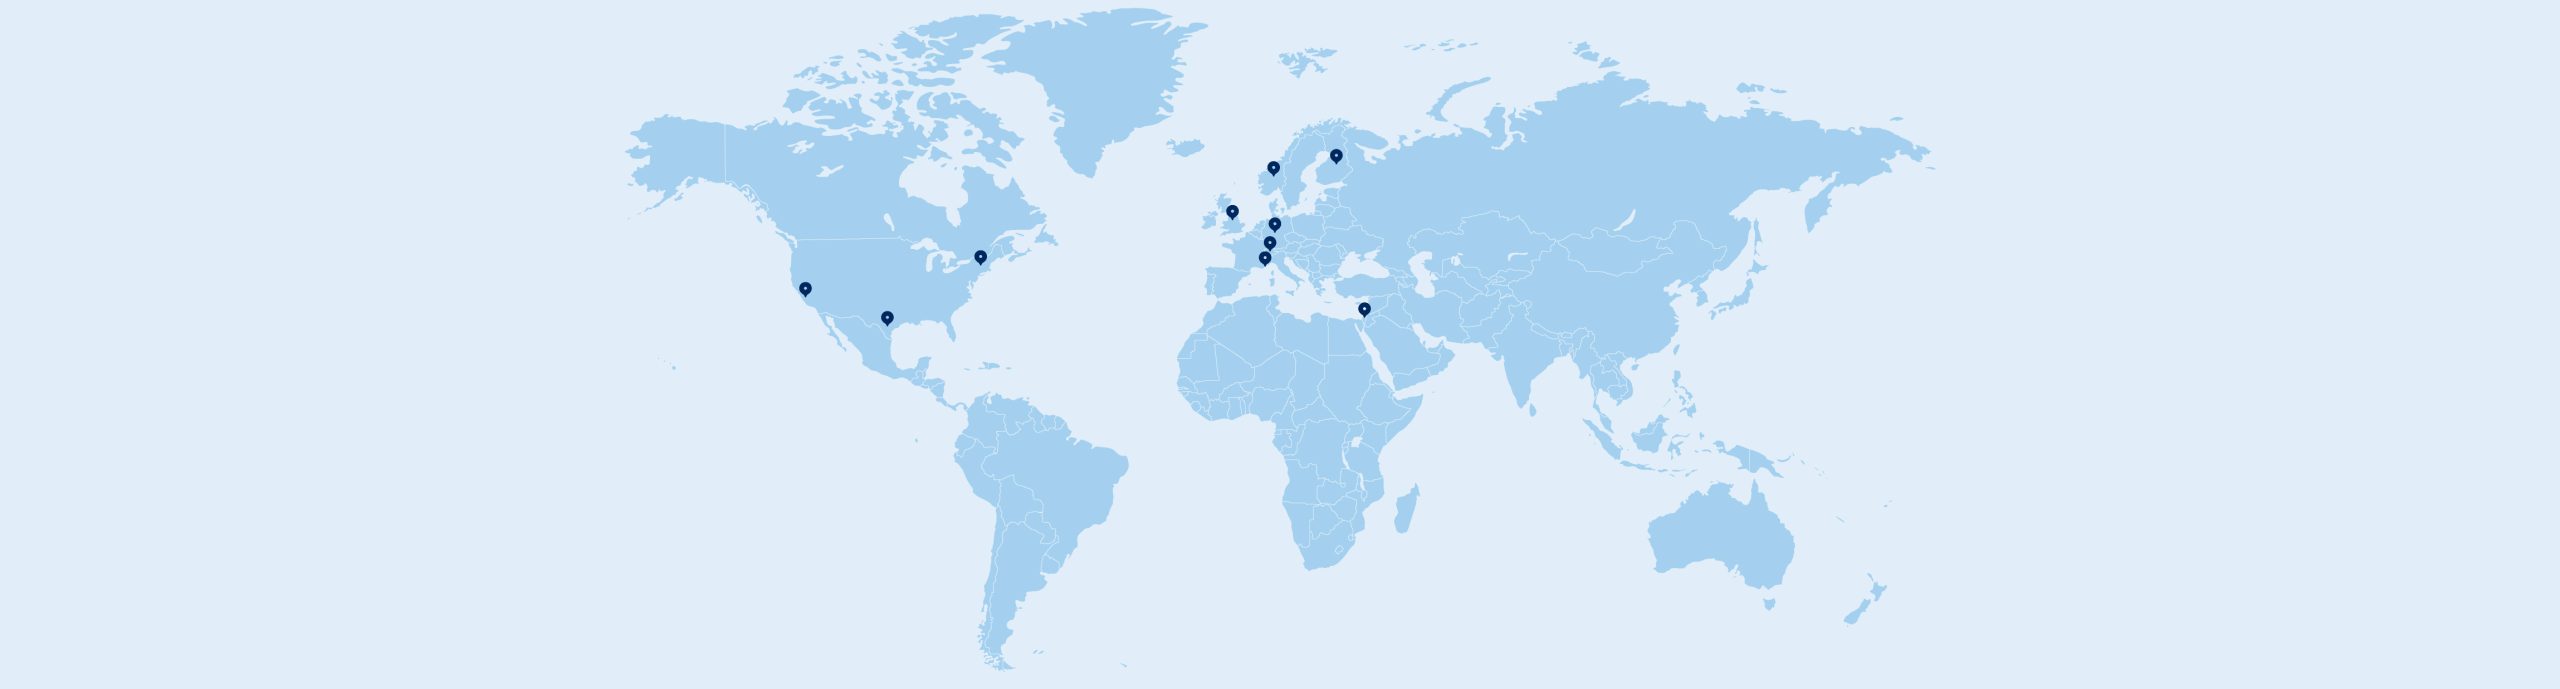 Map of the world with marked areas indicating the locations of our clients in Texas, California, New York State, Germany, Norway, Finland, UK, Switzerland, Israel, Monaco.